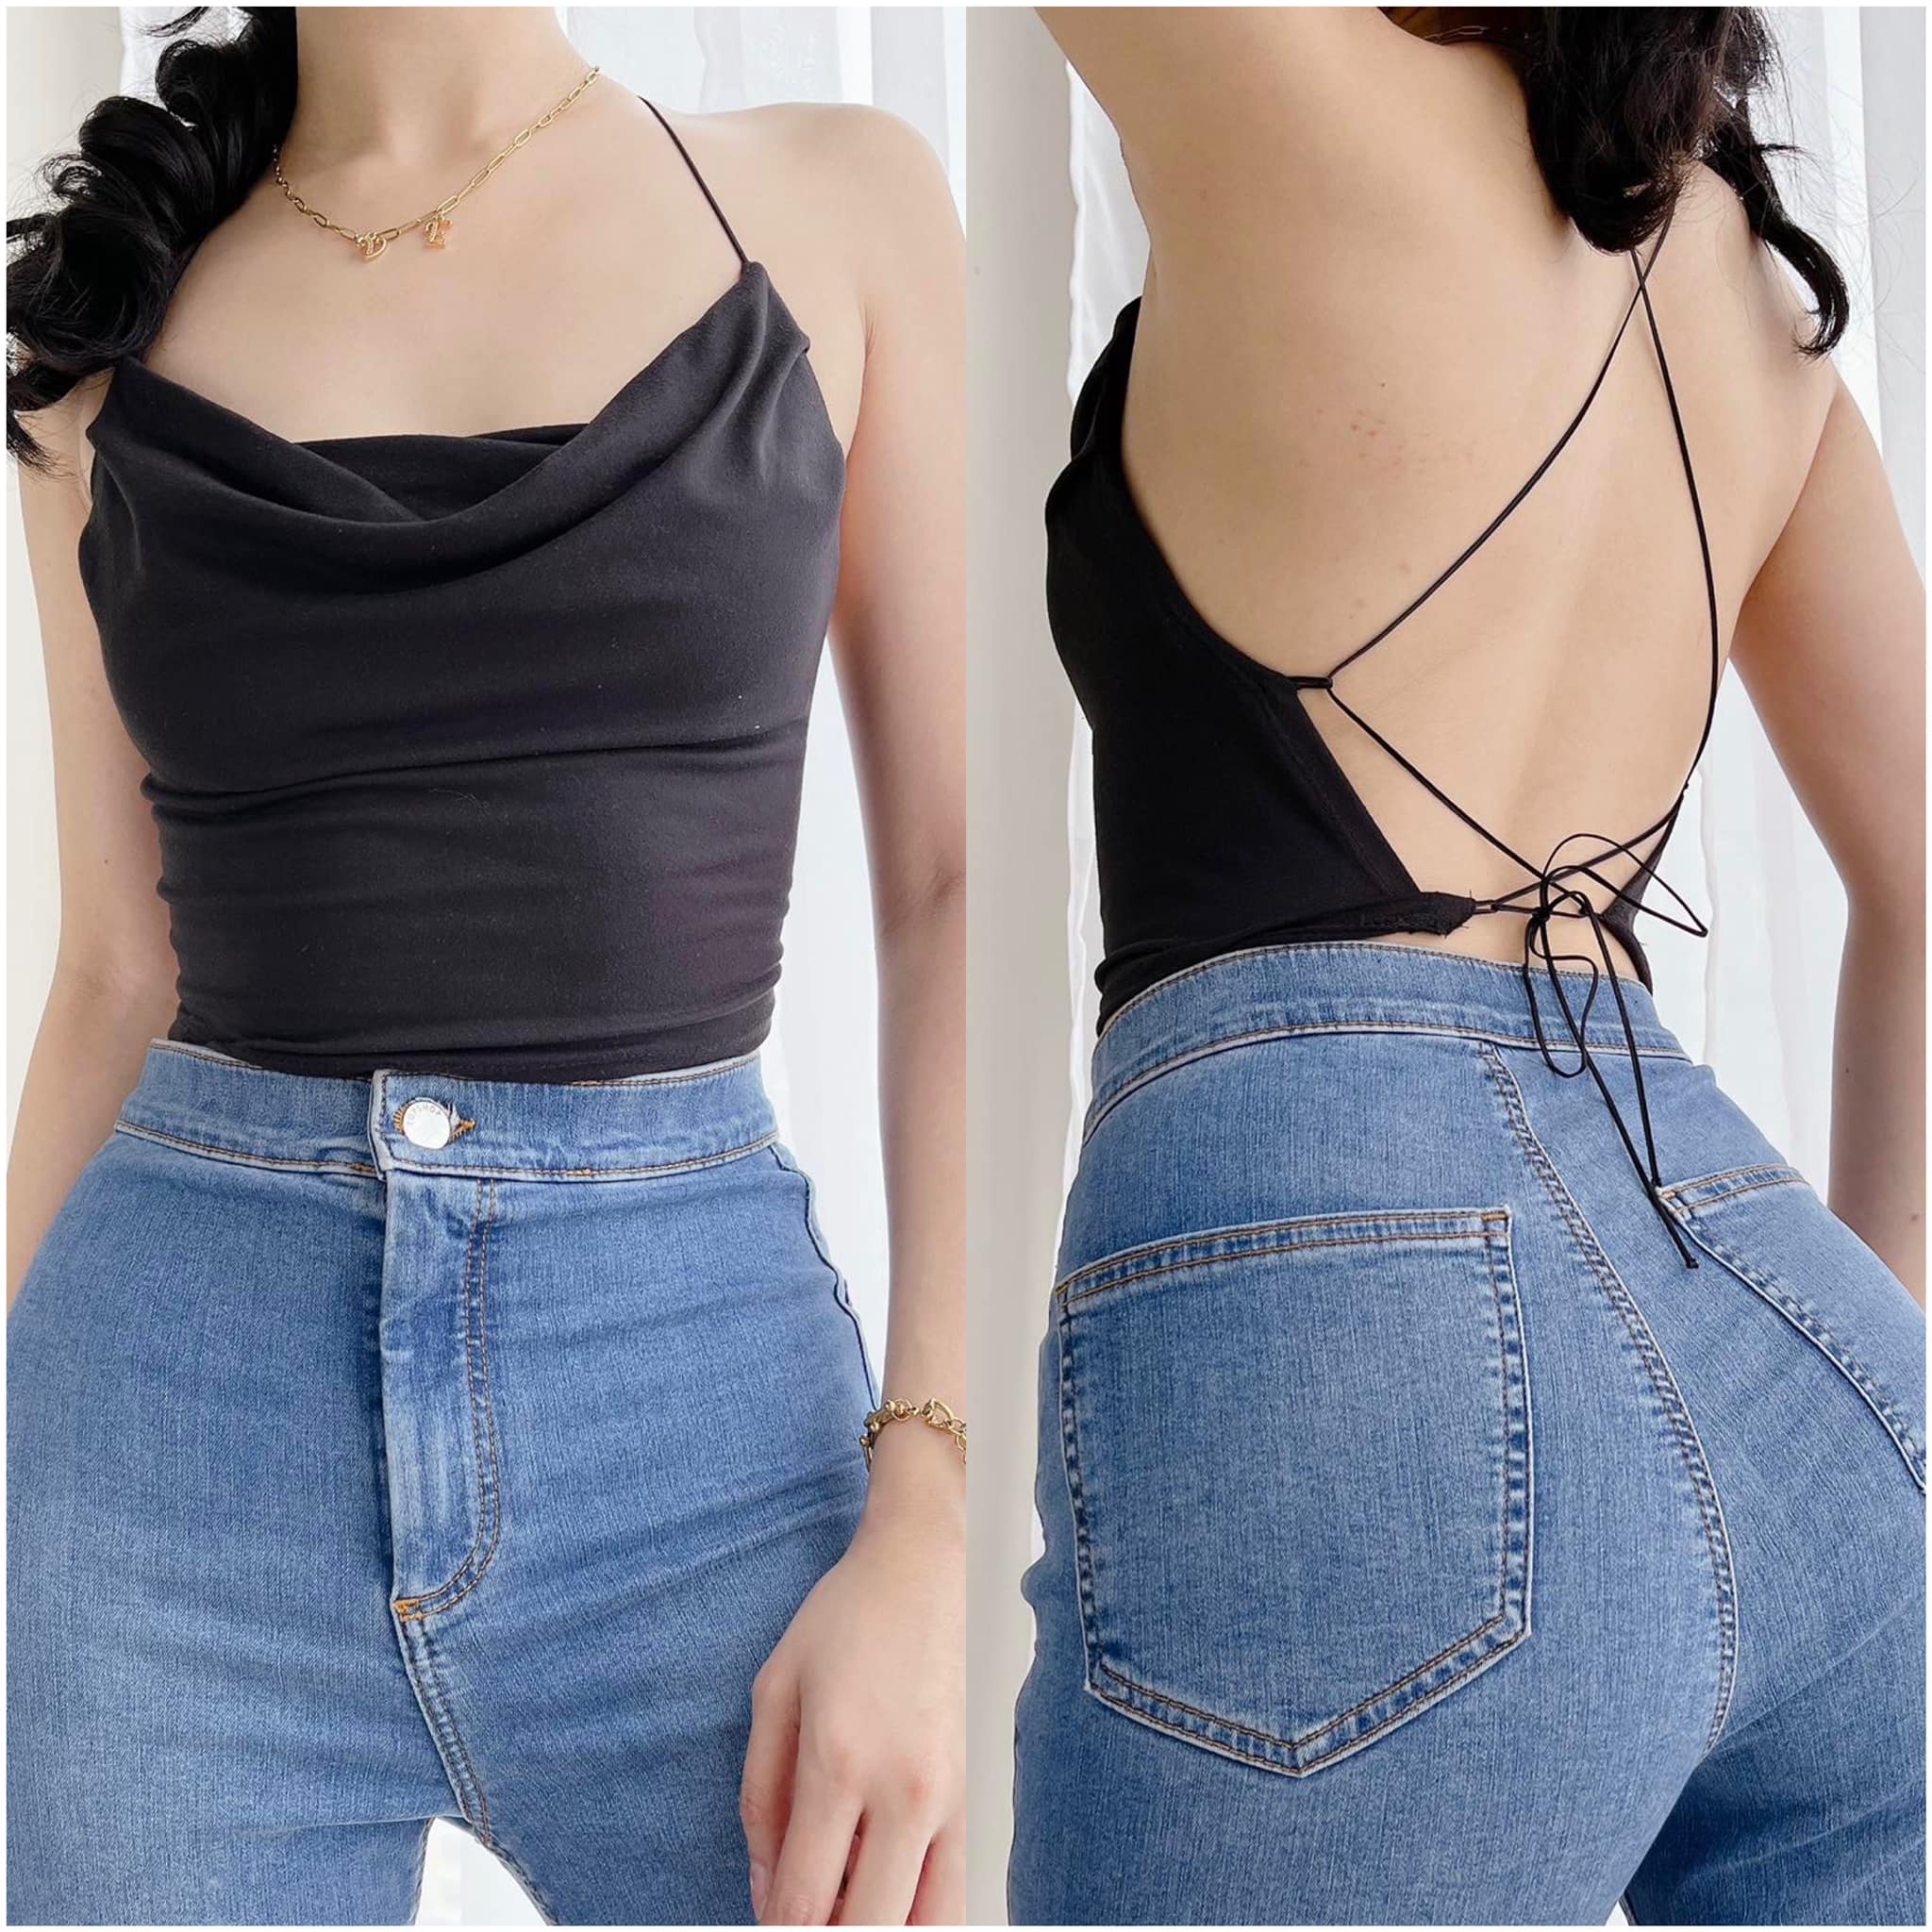 Valerie Trendy String Backless Top/Sexy Back Croptop/Free Size Small to  Medium